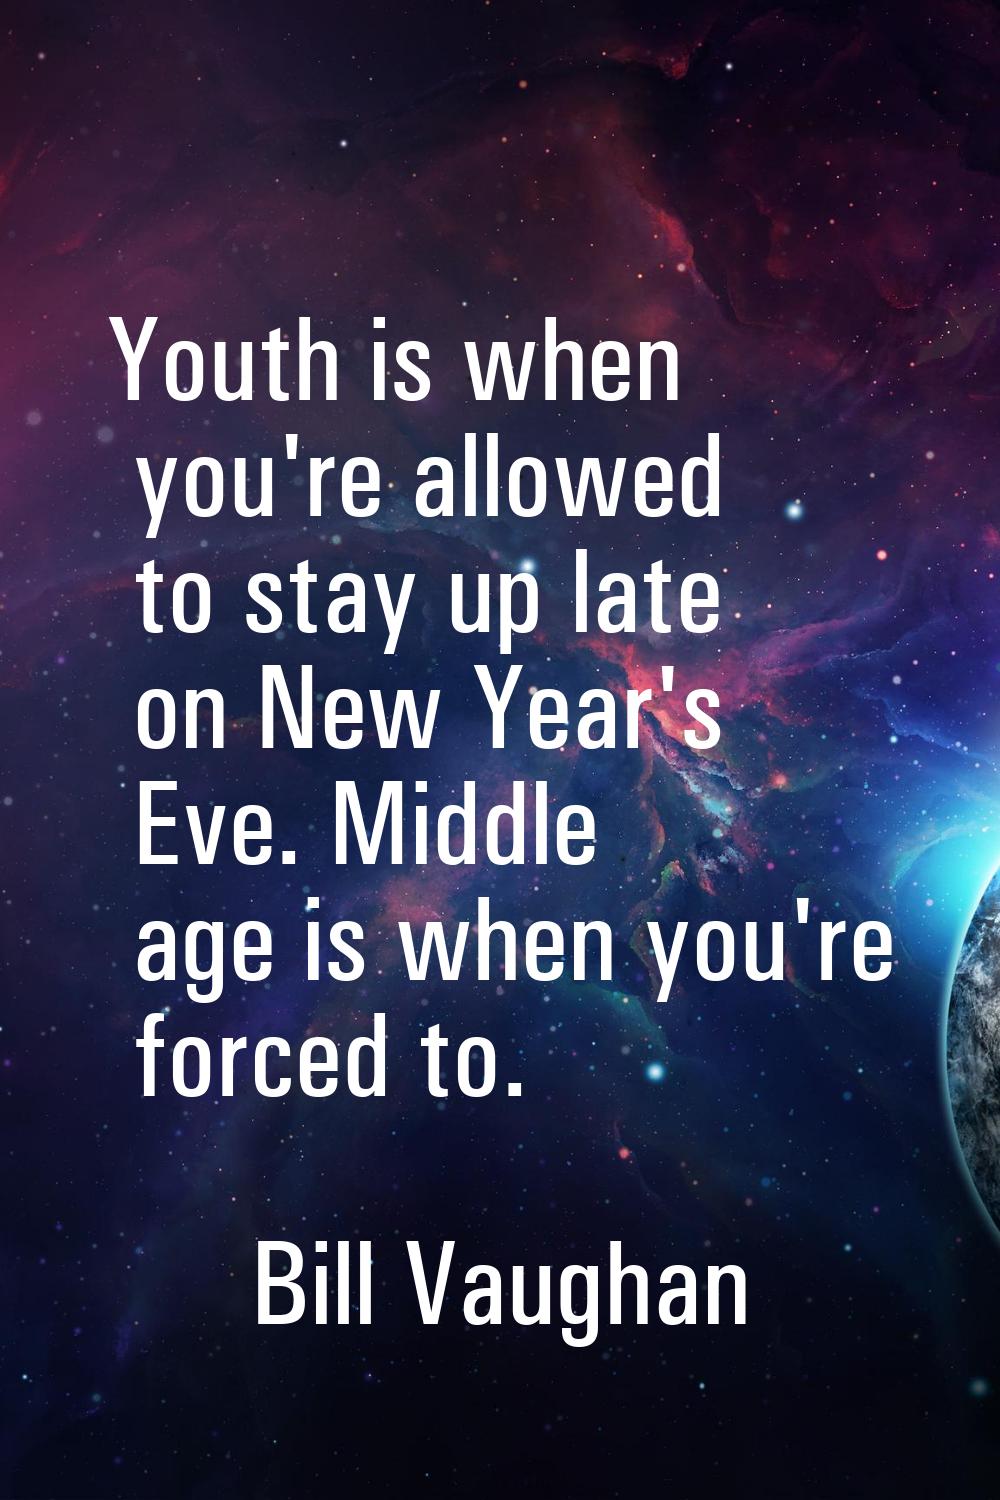 Youth is when you're allowed to stay up late on New Year's Eve. Middle age is when you're forced to